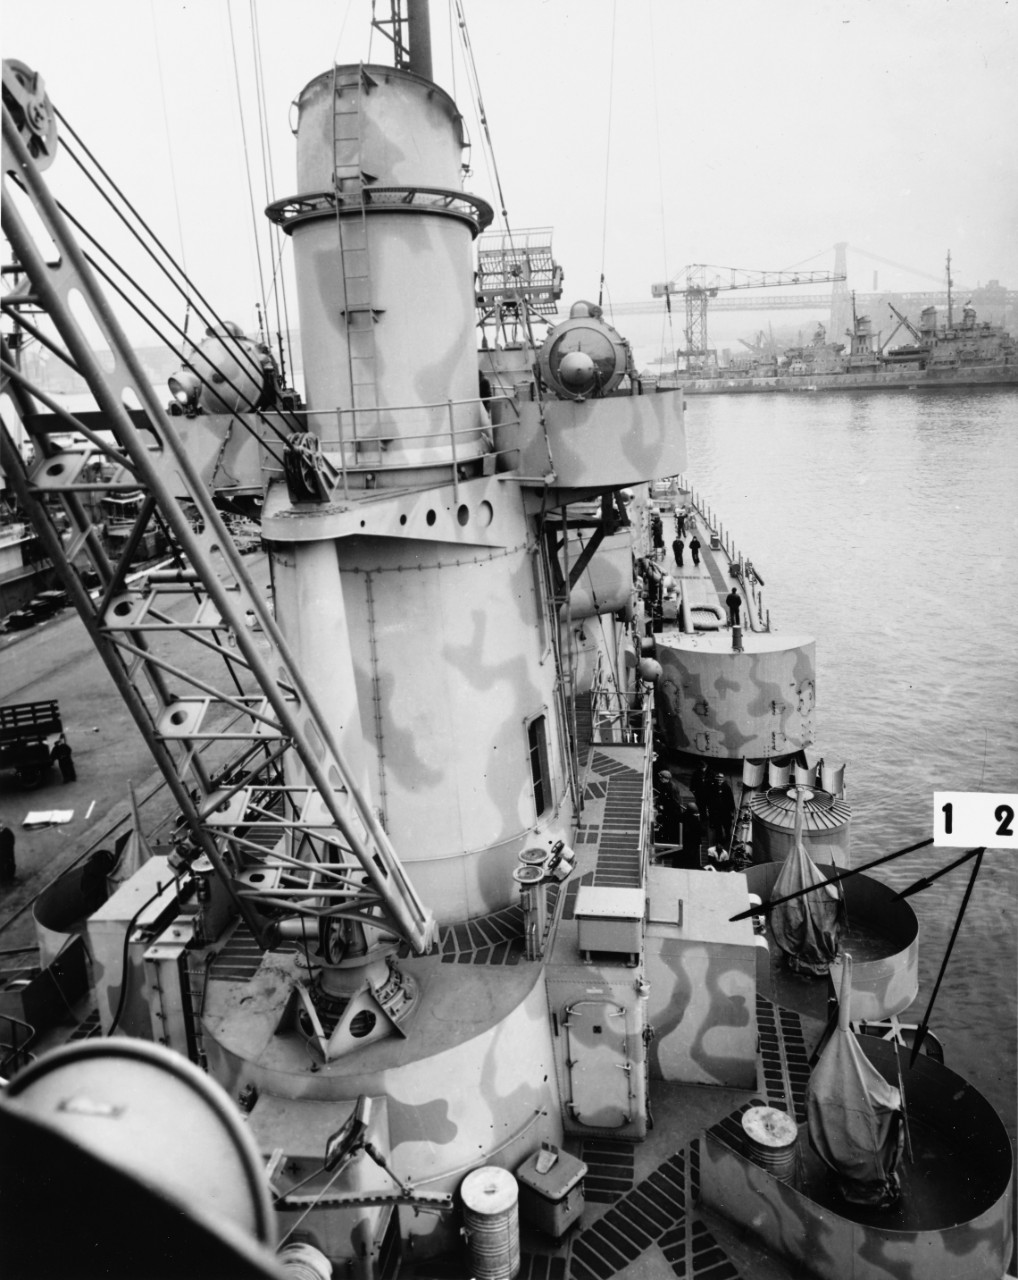 USS Juneau (CL-52) at the New York Navy Yard, 19 March 1942. Arrows mark recent alterations. Note details of boat crane.